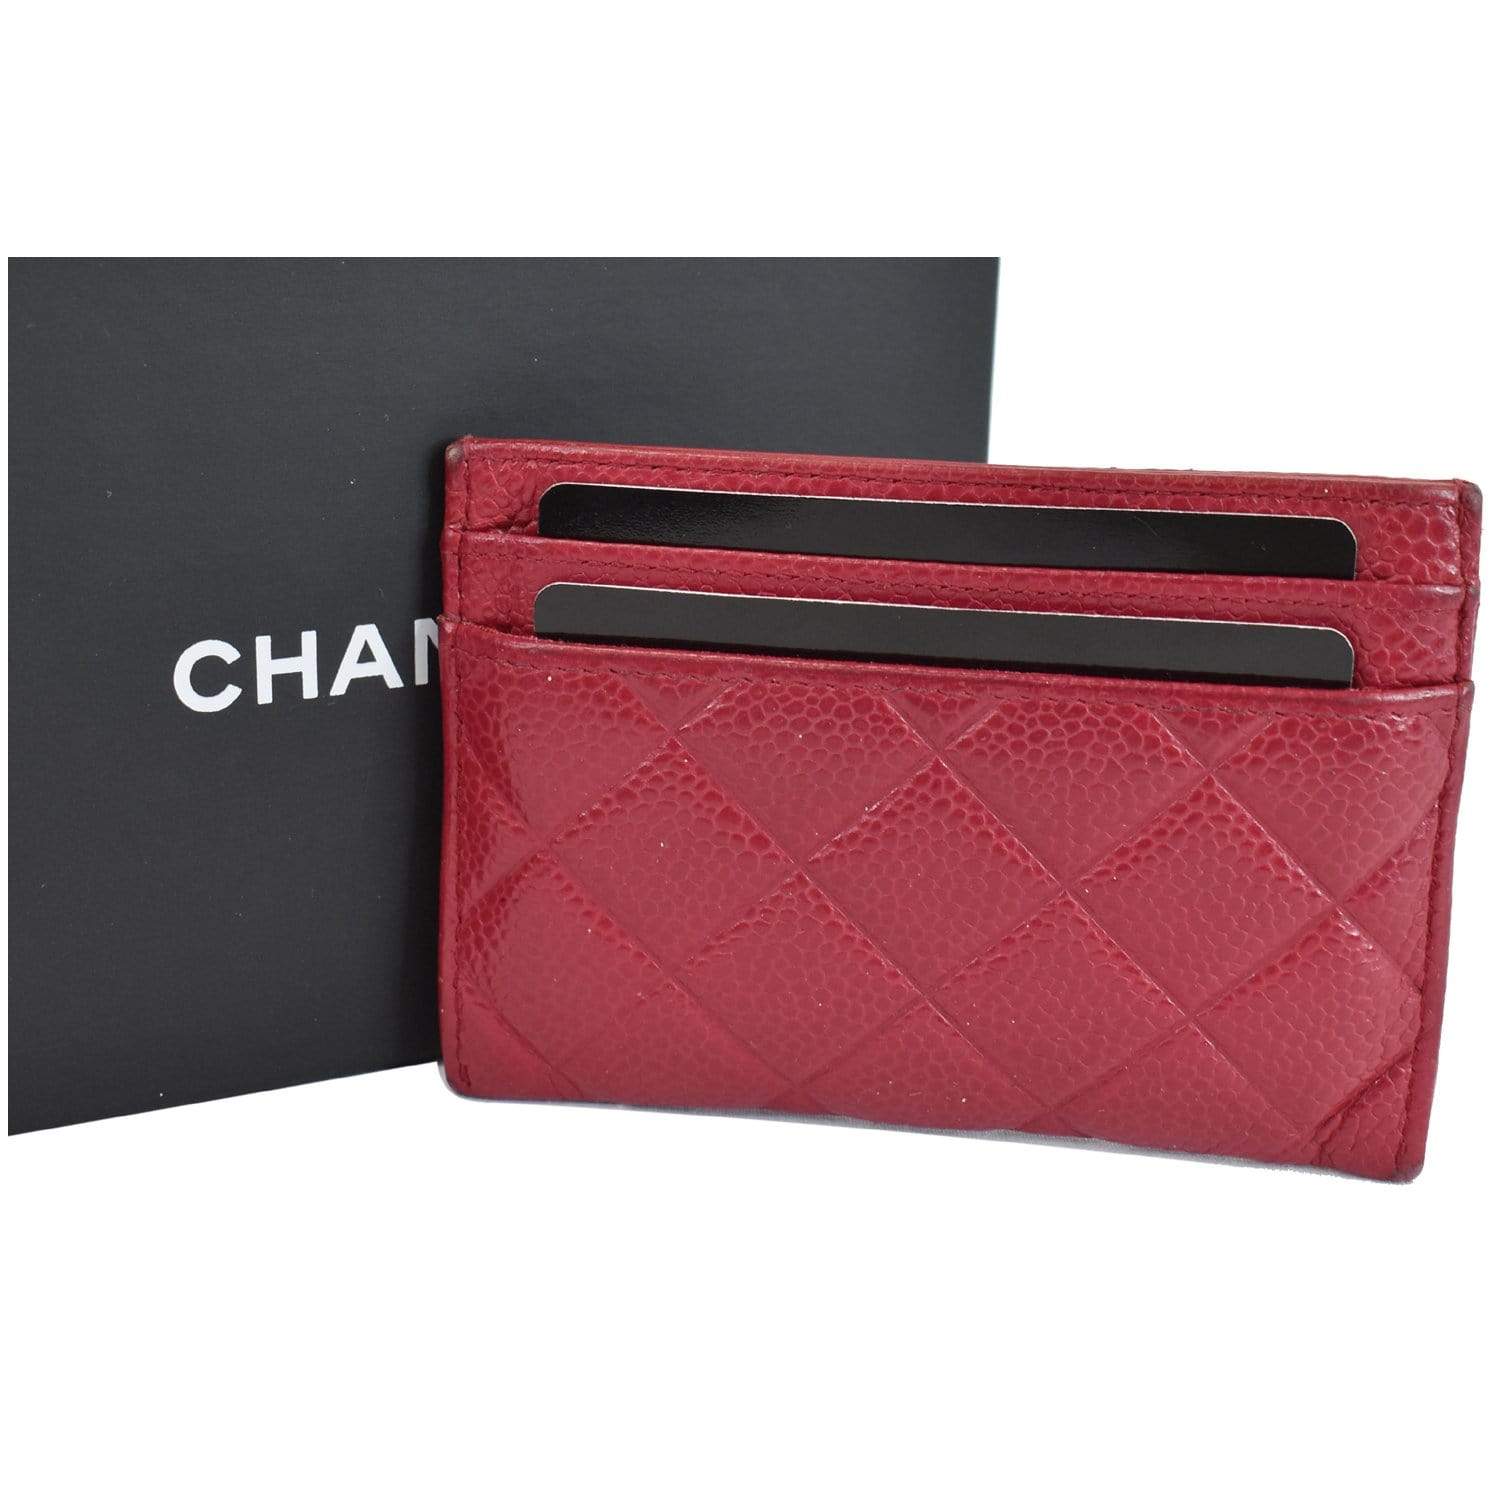 Chanel Card Holder Caviar Leather Case Hot Pink